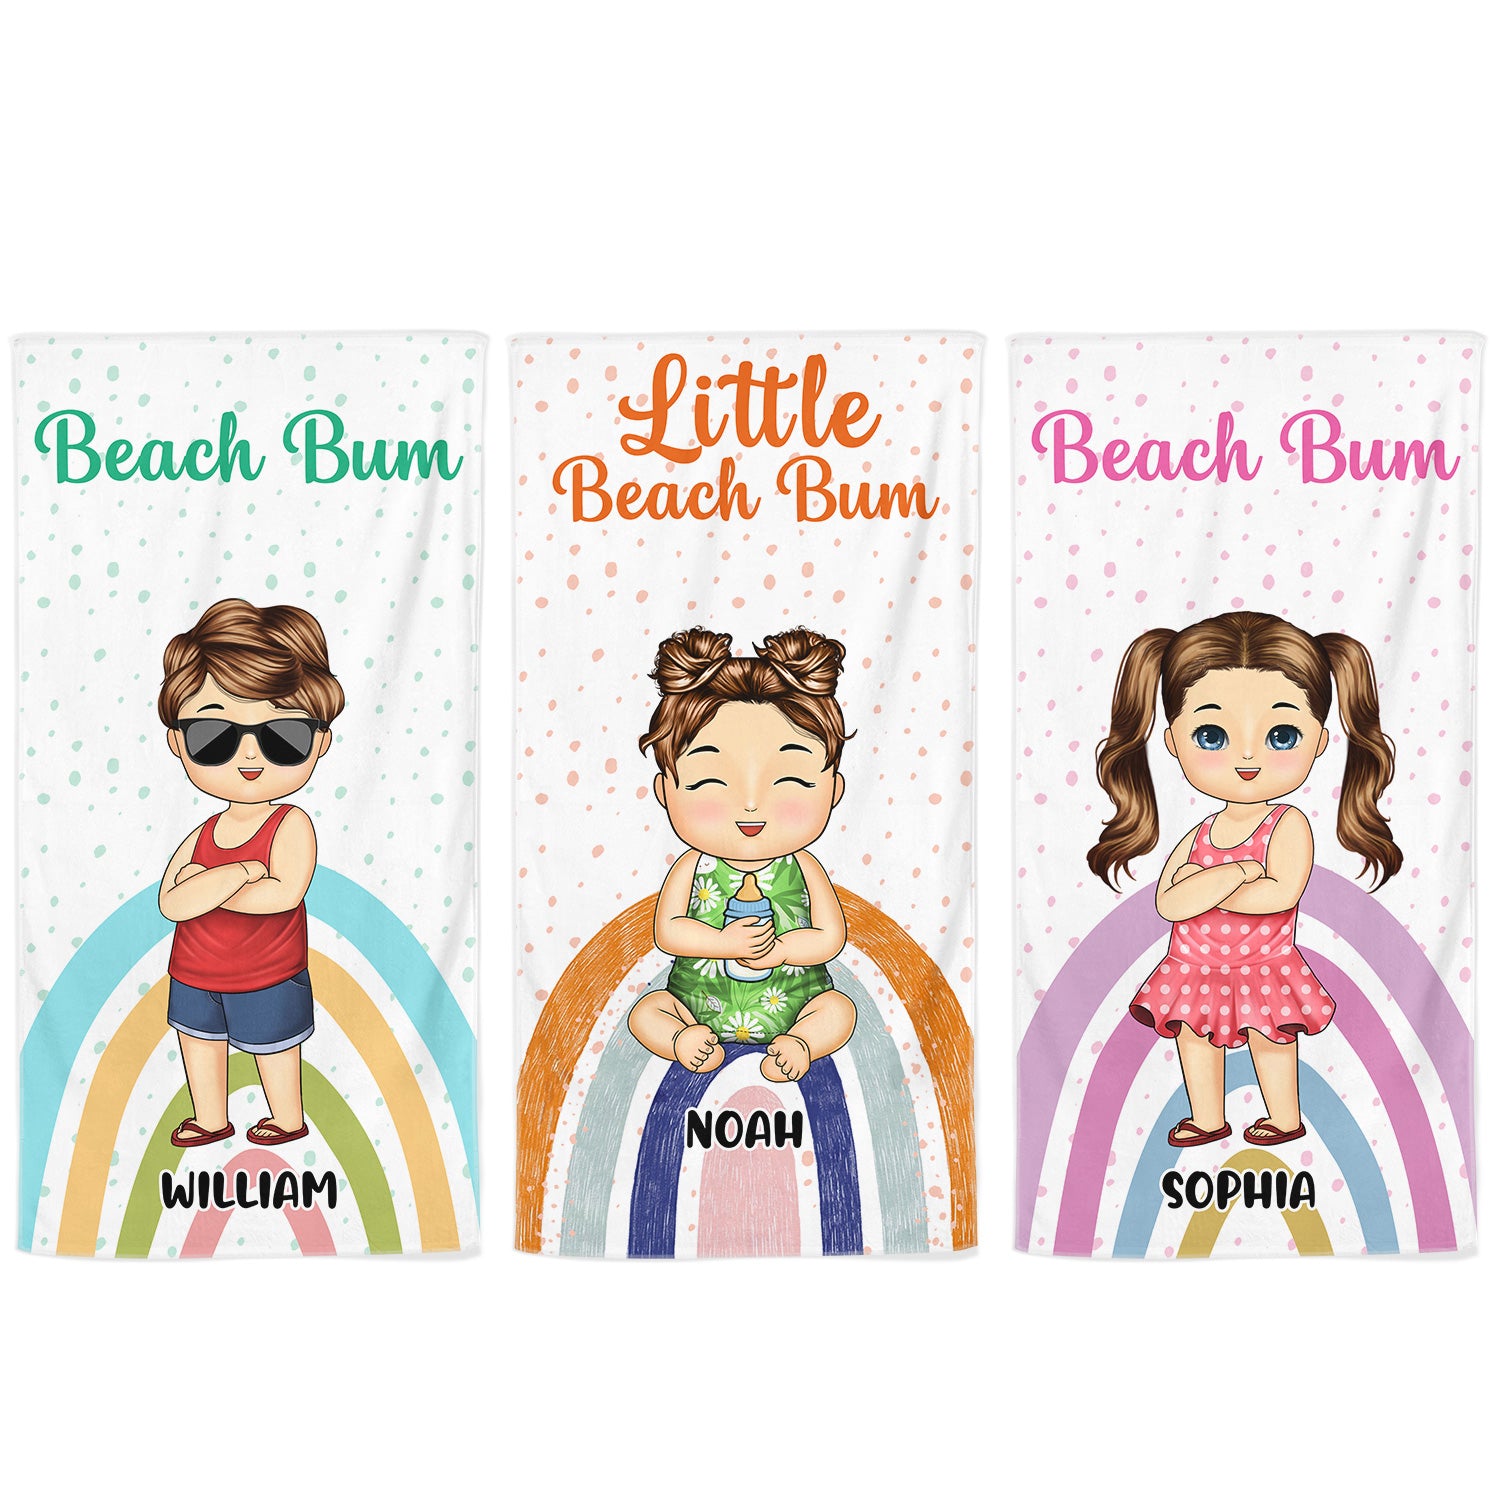 Little Beach Bum - Summer, Vacation, Beach Funny Gift For Kids - Personalized Beach Towel